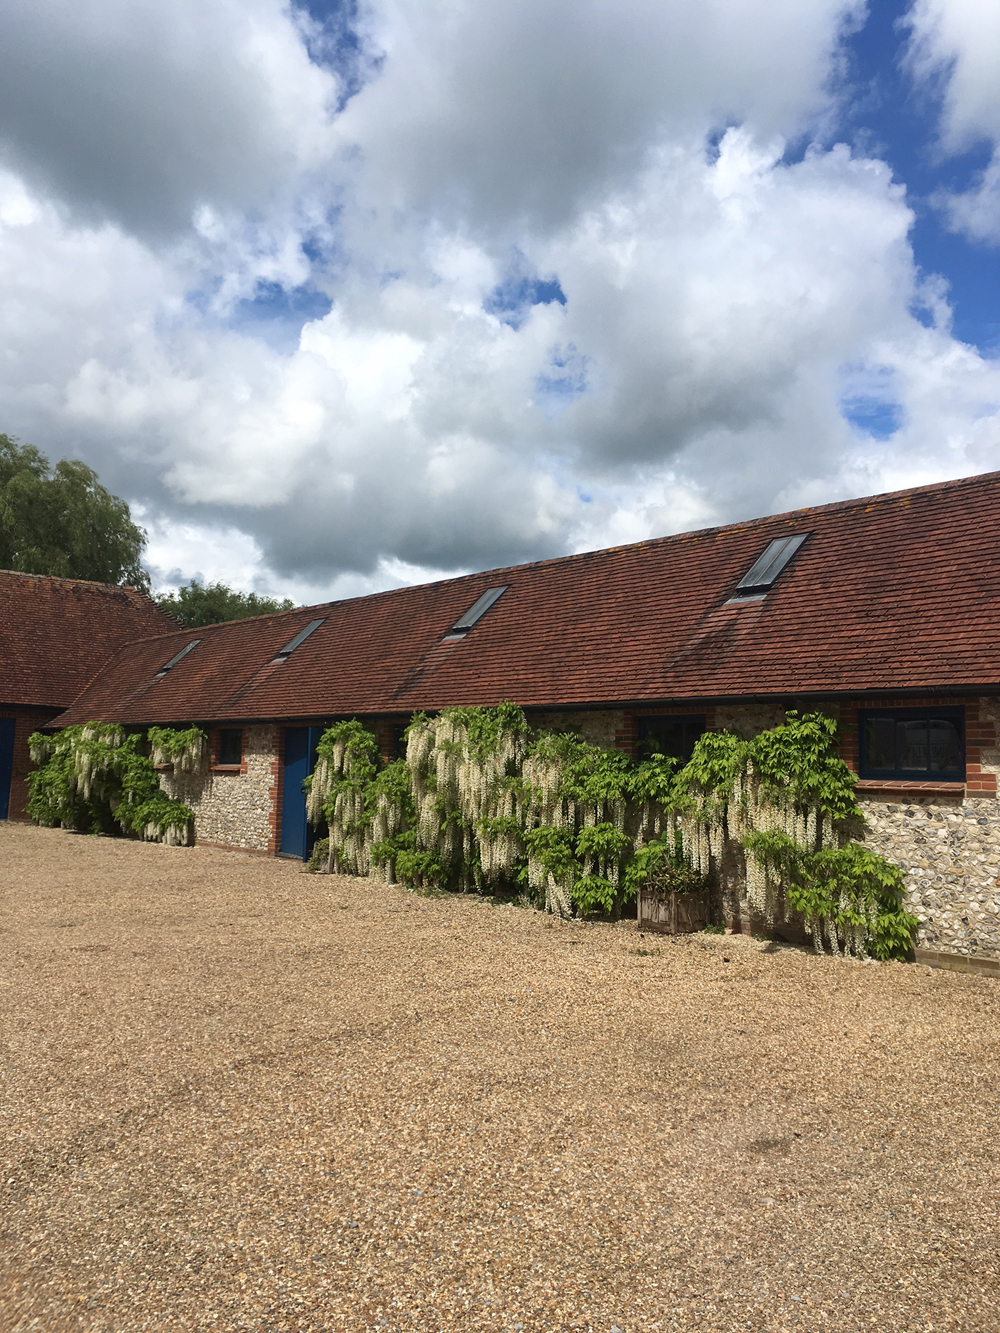 Tips for finding a barn wedding venue within 2 hours of Hertfordshire with no corkage